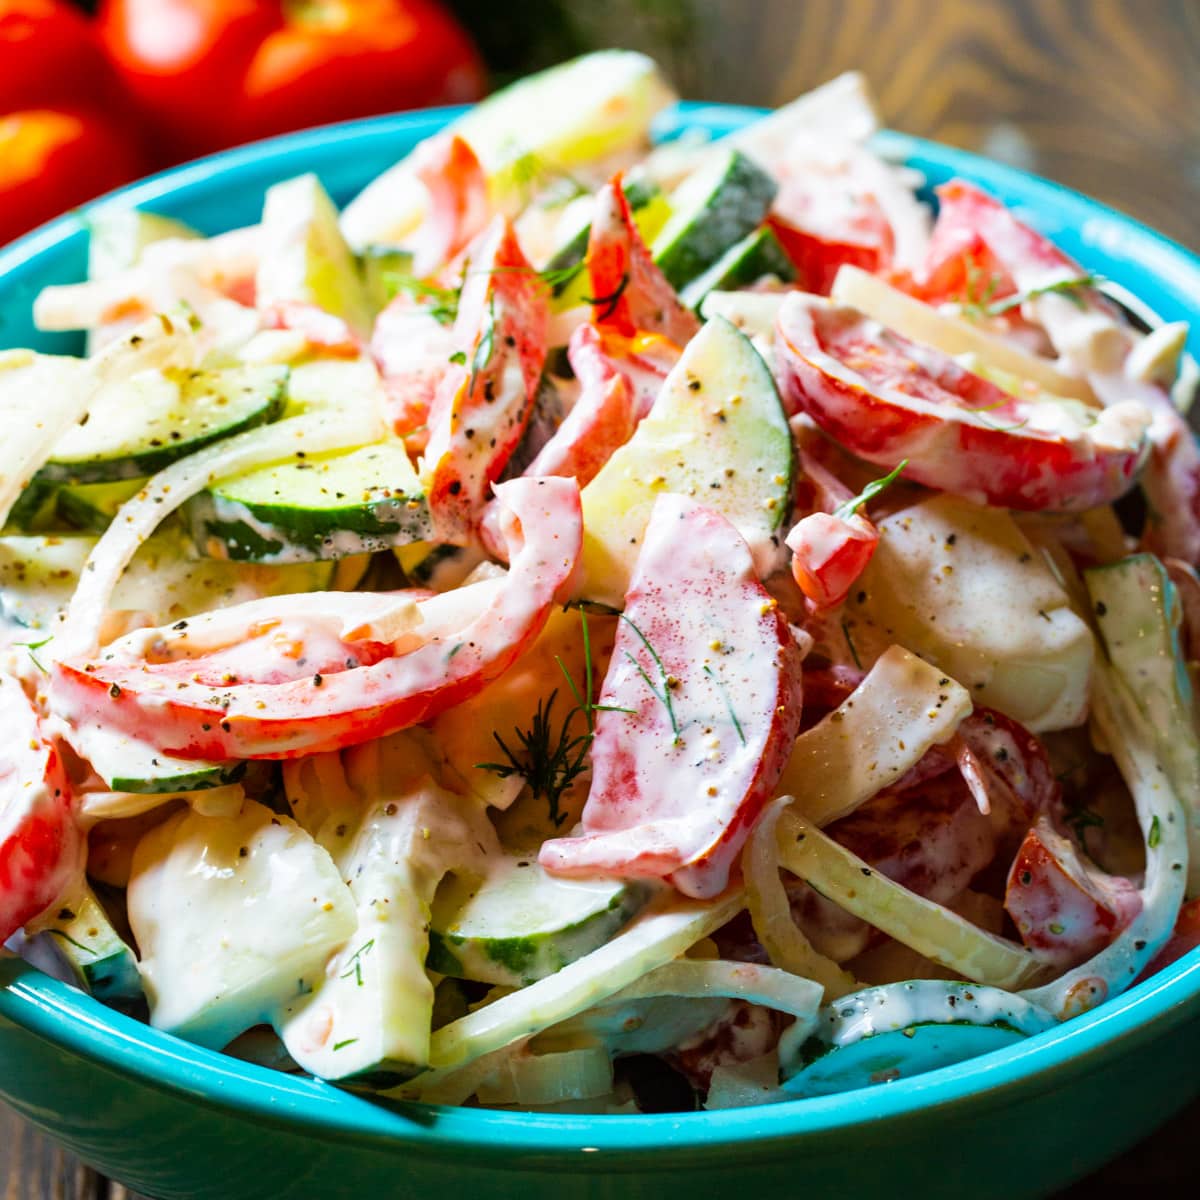 Creamy Tomato and Cucumber Salad in a blue serving bowl.